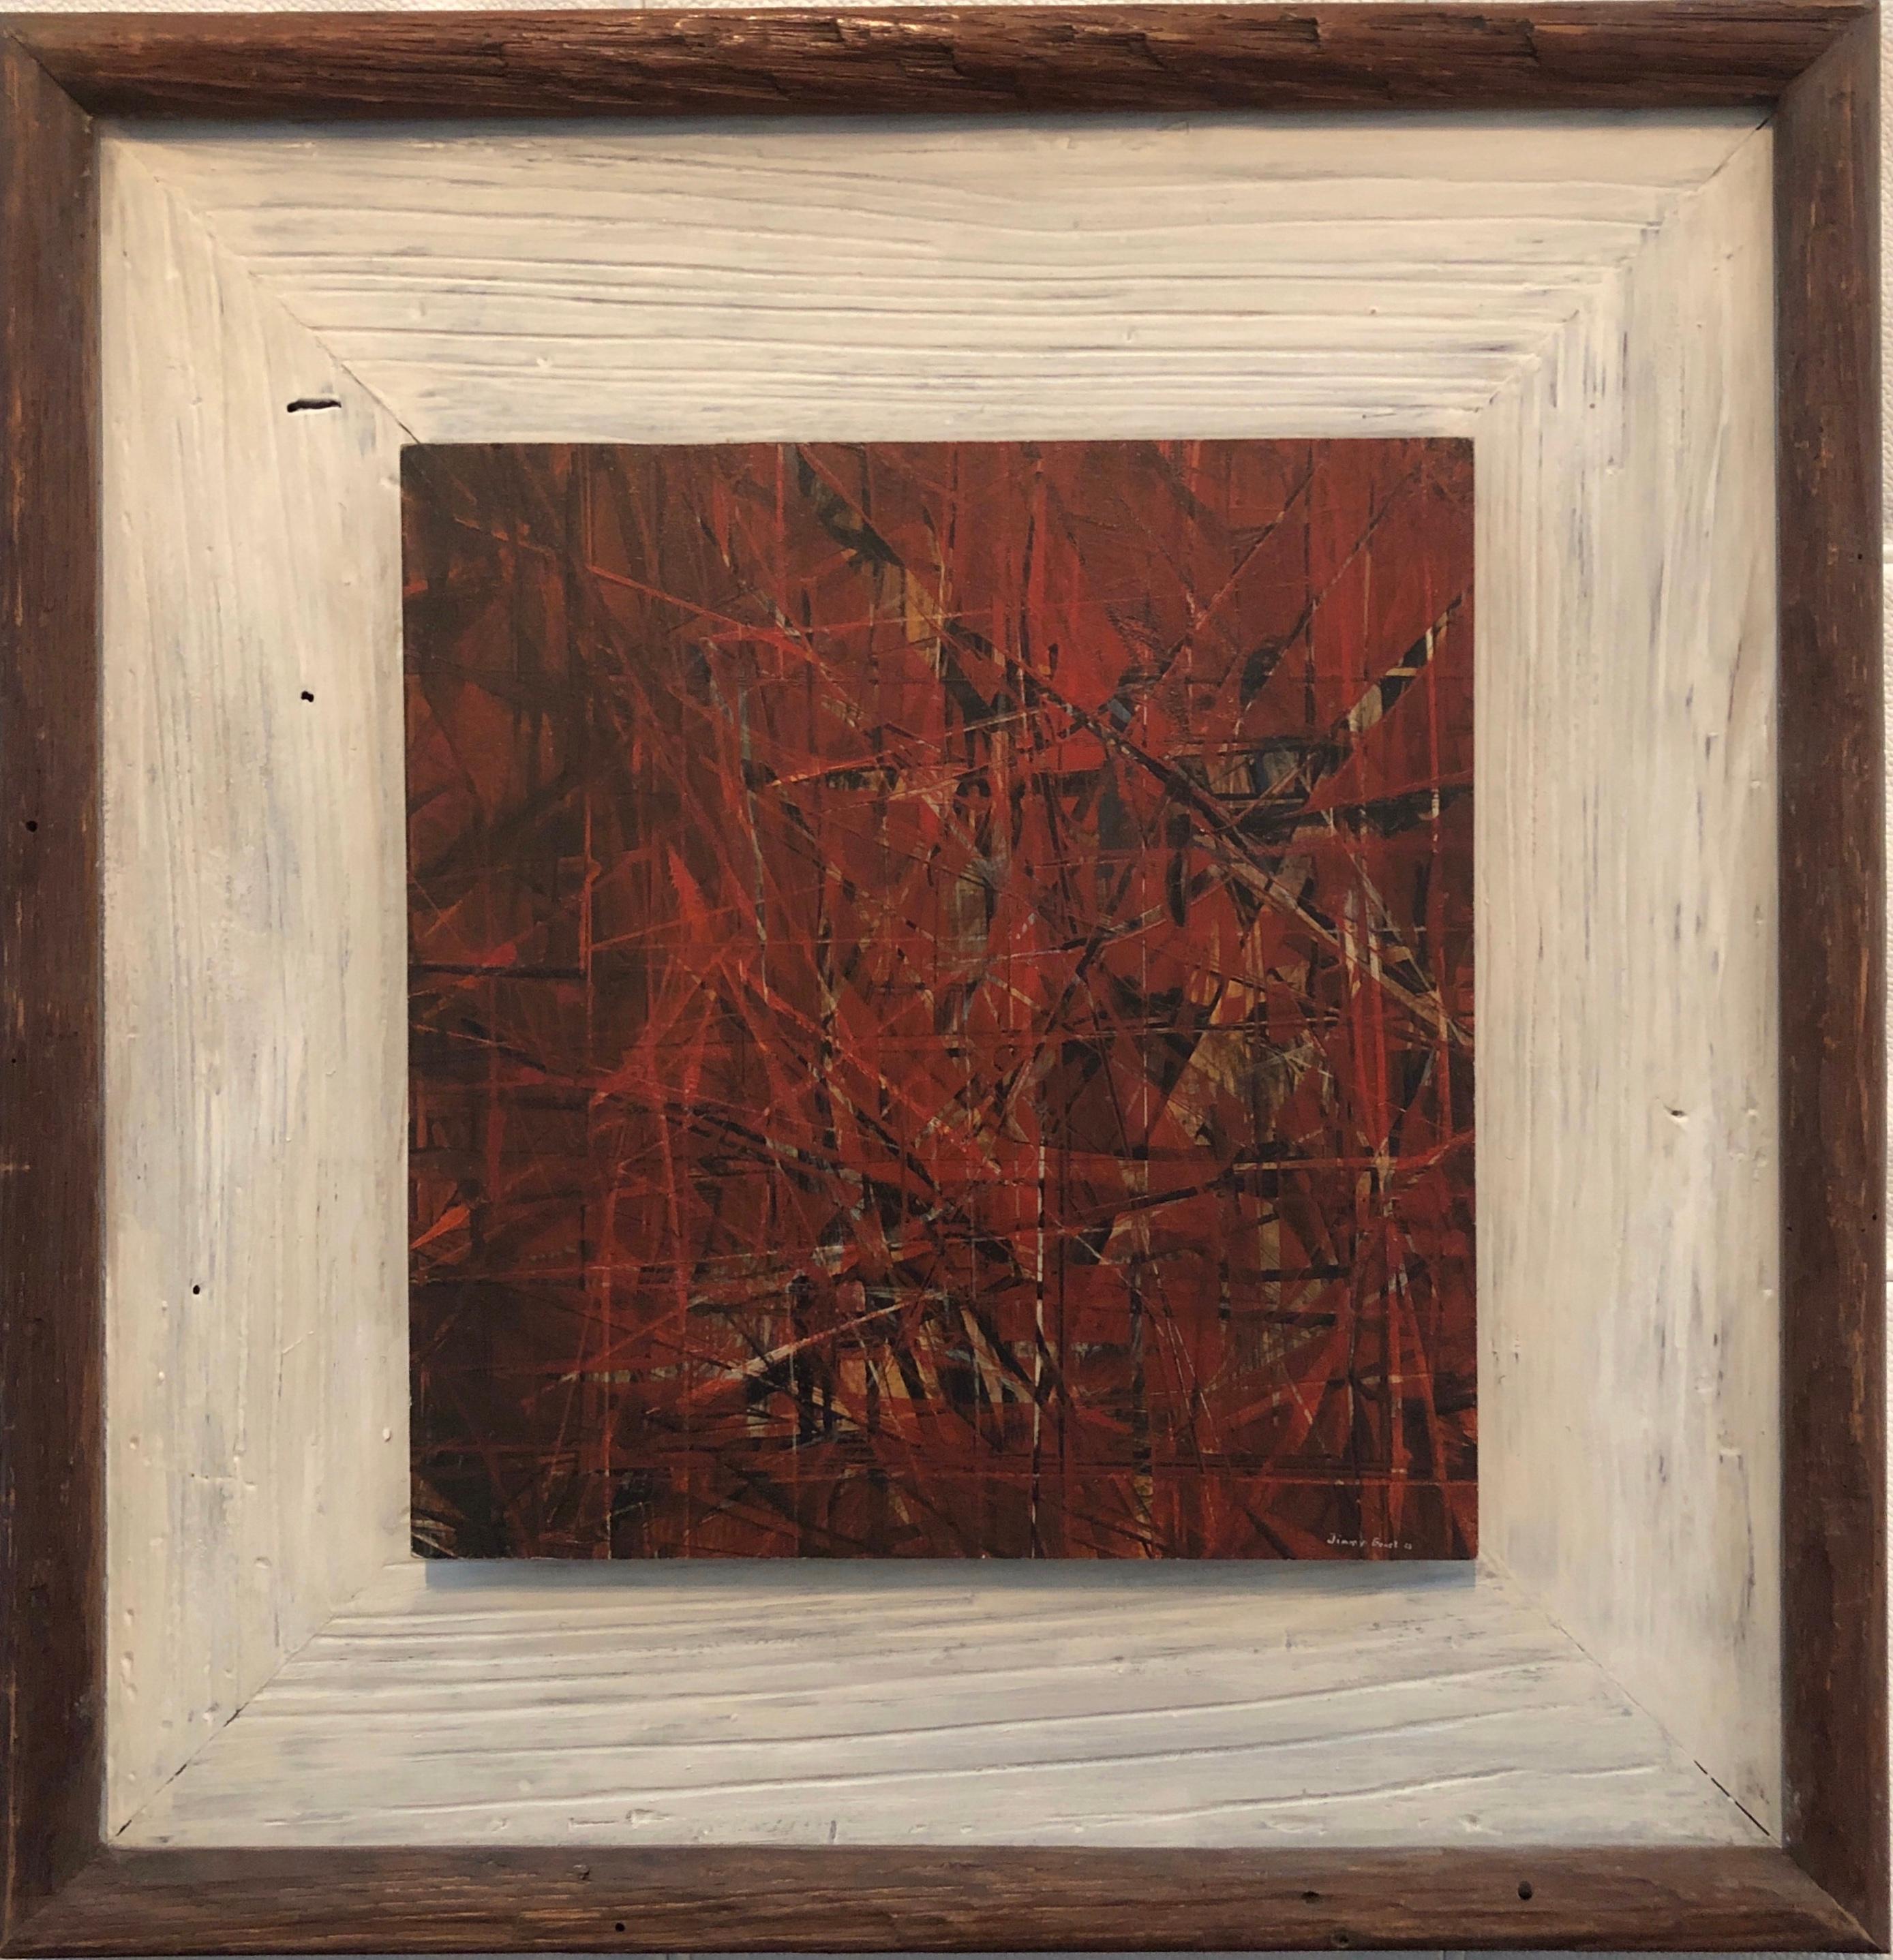 This abstract is signed and dated "Jimmy Ernst 63"  on the lower right. Measurement of artwork is 8 ½" x 8 ¼" and framed measures 15 ½" x 15" x 1 ¼" in a painted frame.

Provenance: Gift from the artist to his personal friend architect John